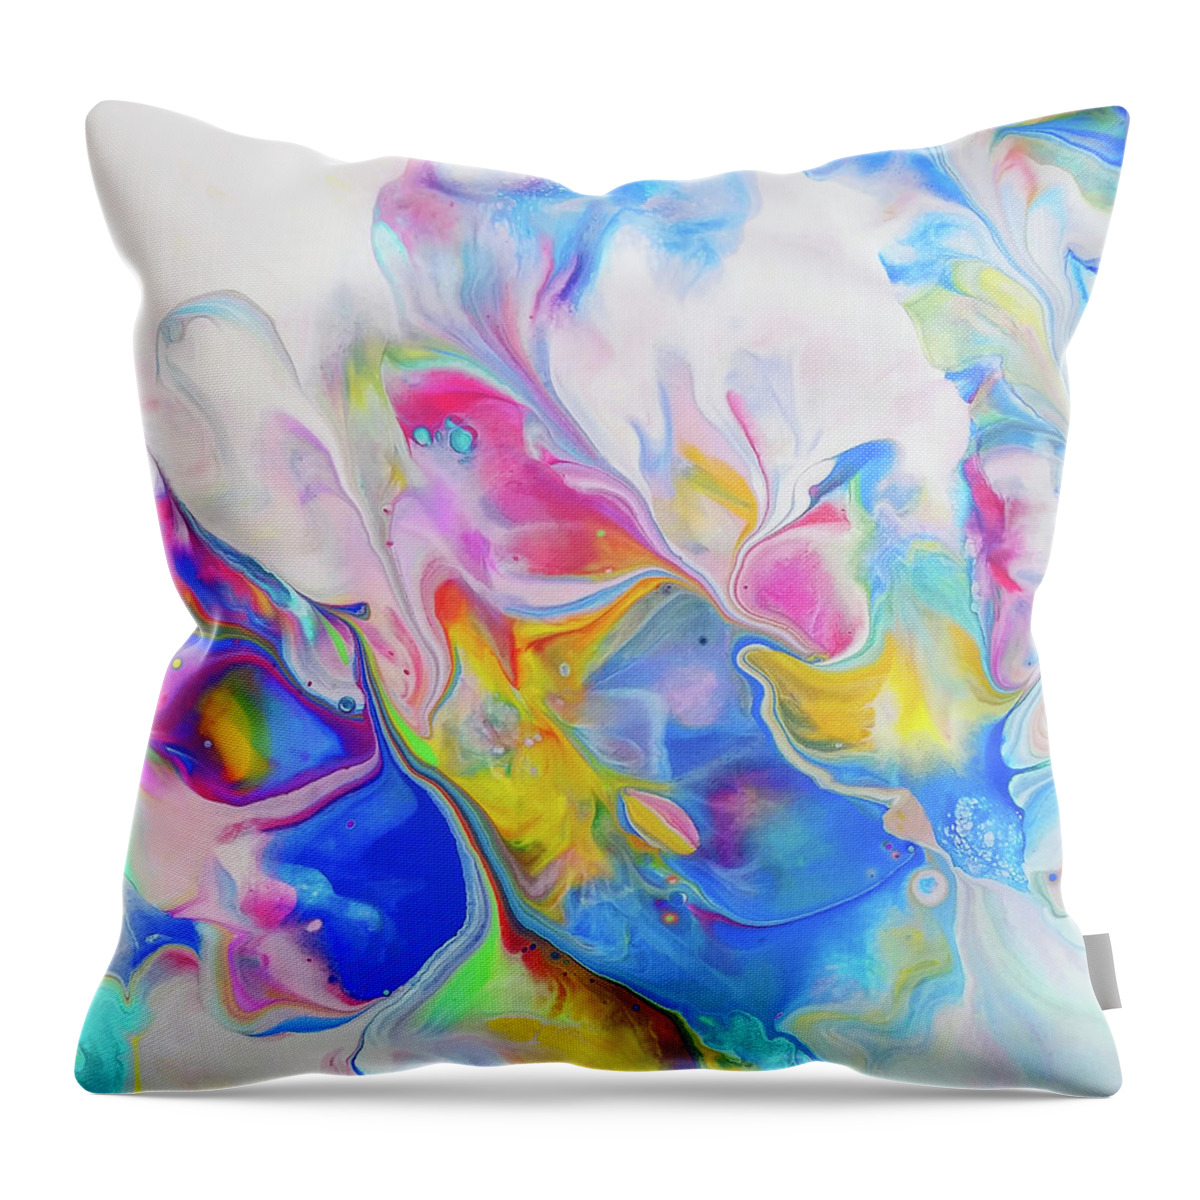 Colorful Throw Pillow featuring the painting Dreams 3 by Deborah Erlandson